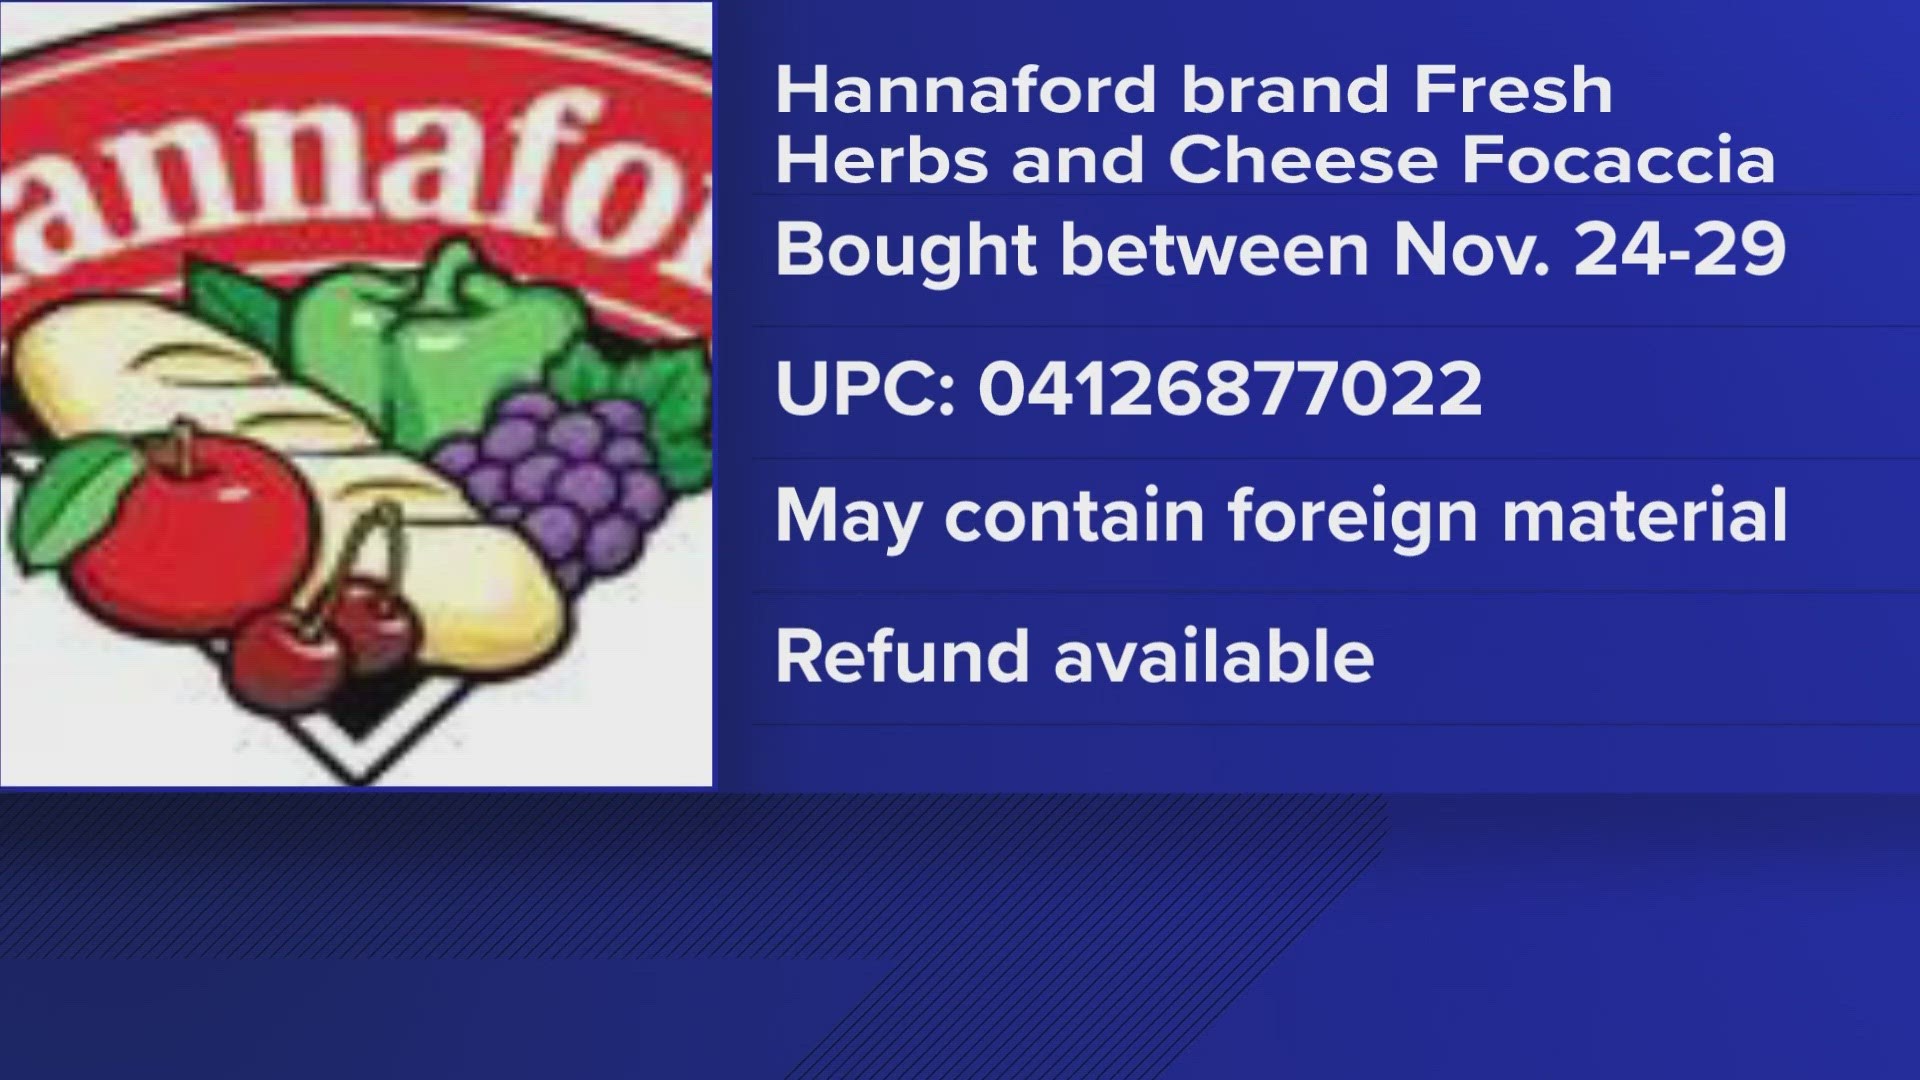 Customers who shopped there are warned that Hannford brand Fresh Herbs and Cheese Focaccia may contain foreign material.